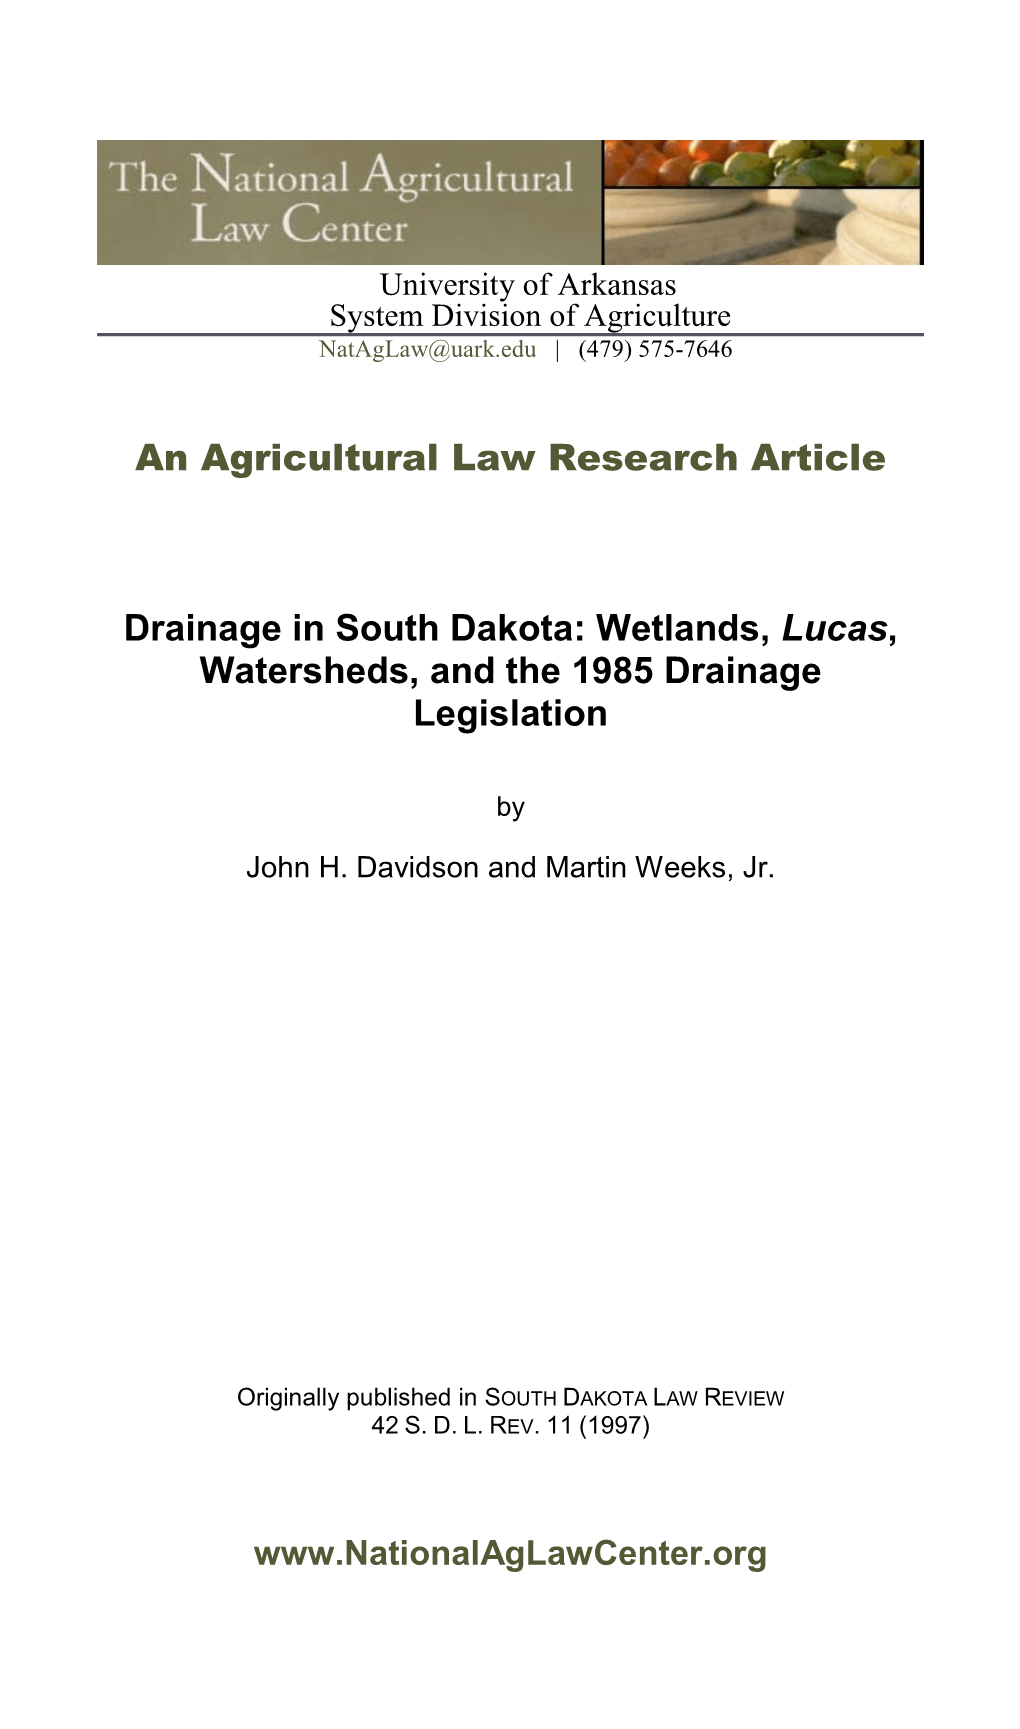 Wetlands, Lucas, Watersheds, and the 1985 Drainage Legislation